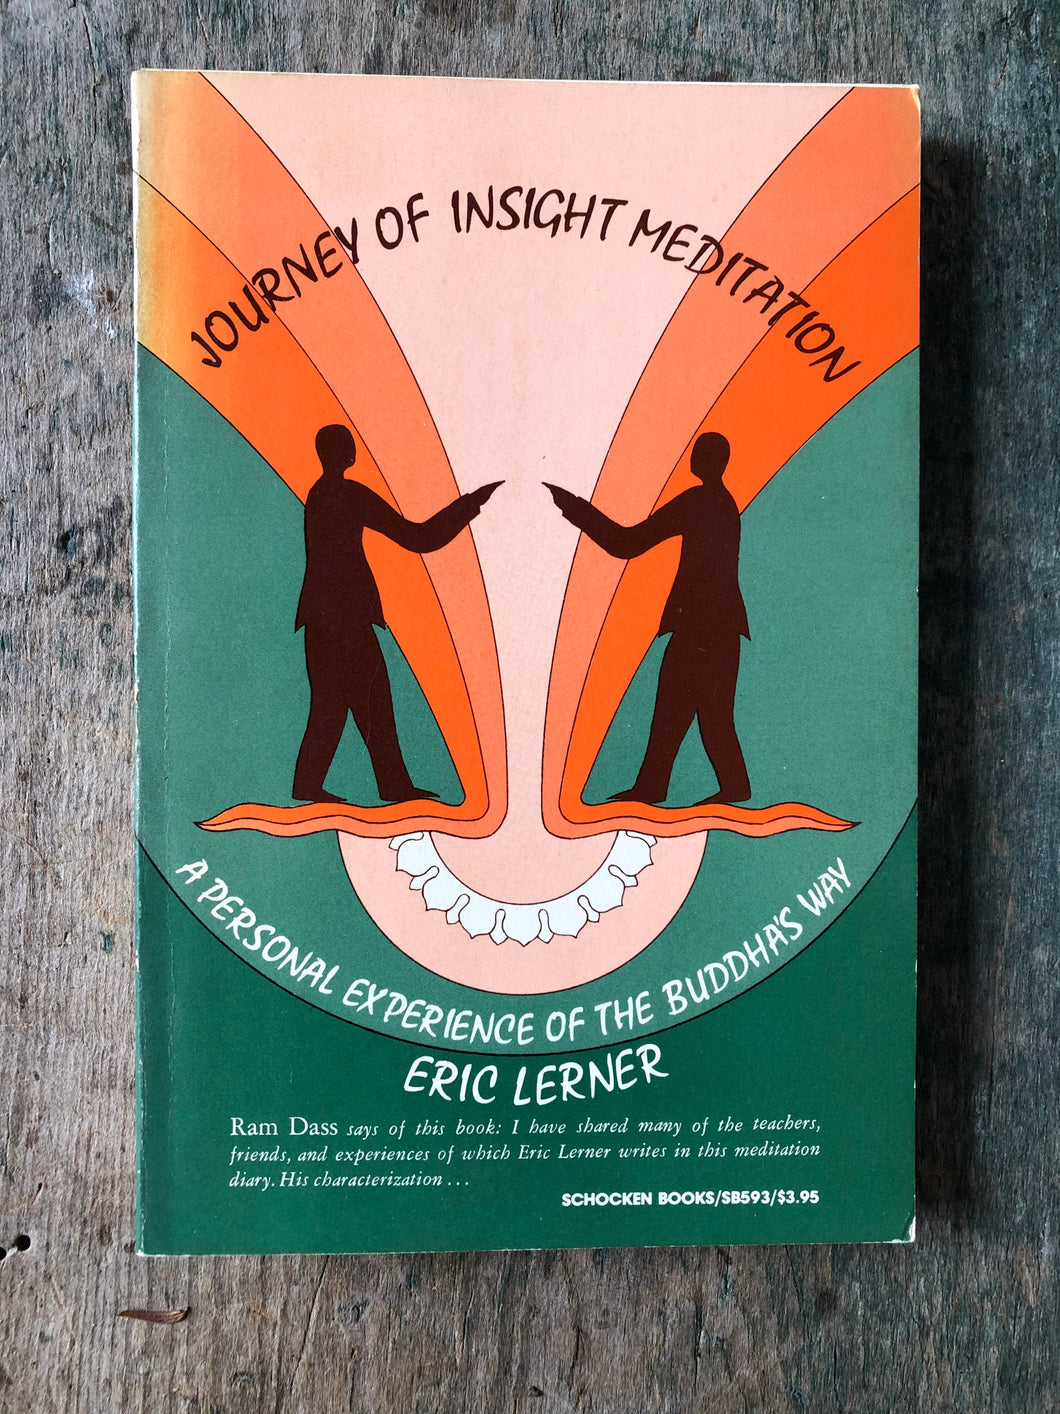 Journey of Insight Meditation: A Personal Experience of the Buddha's Way by Eric Lerner